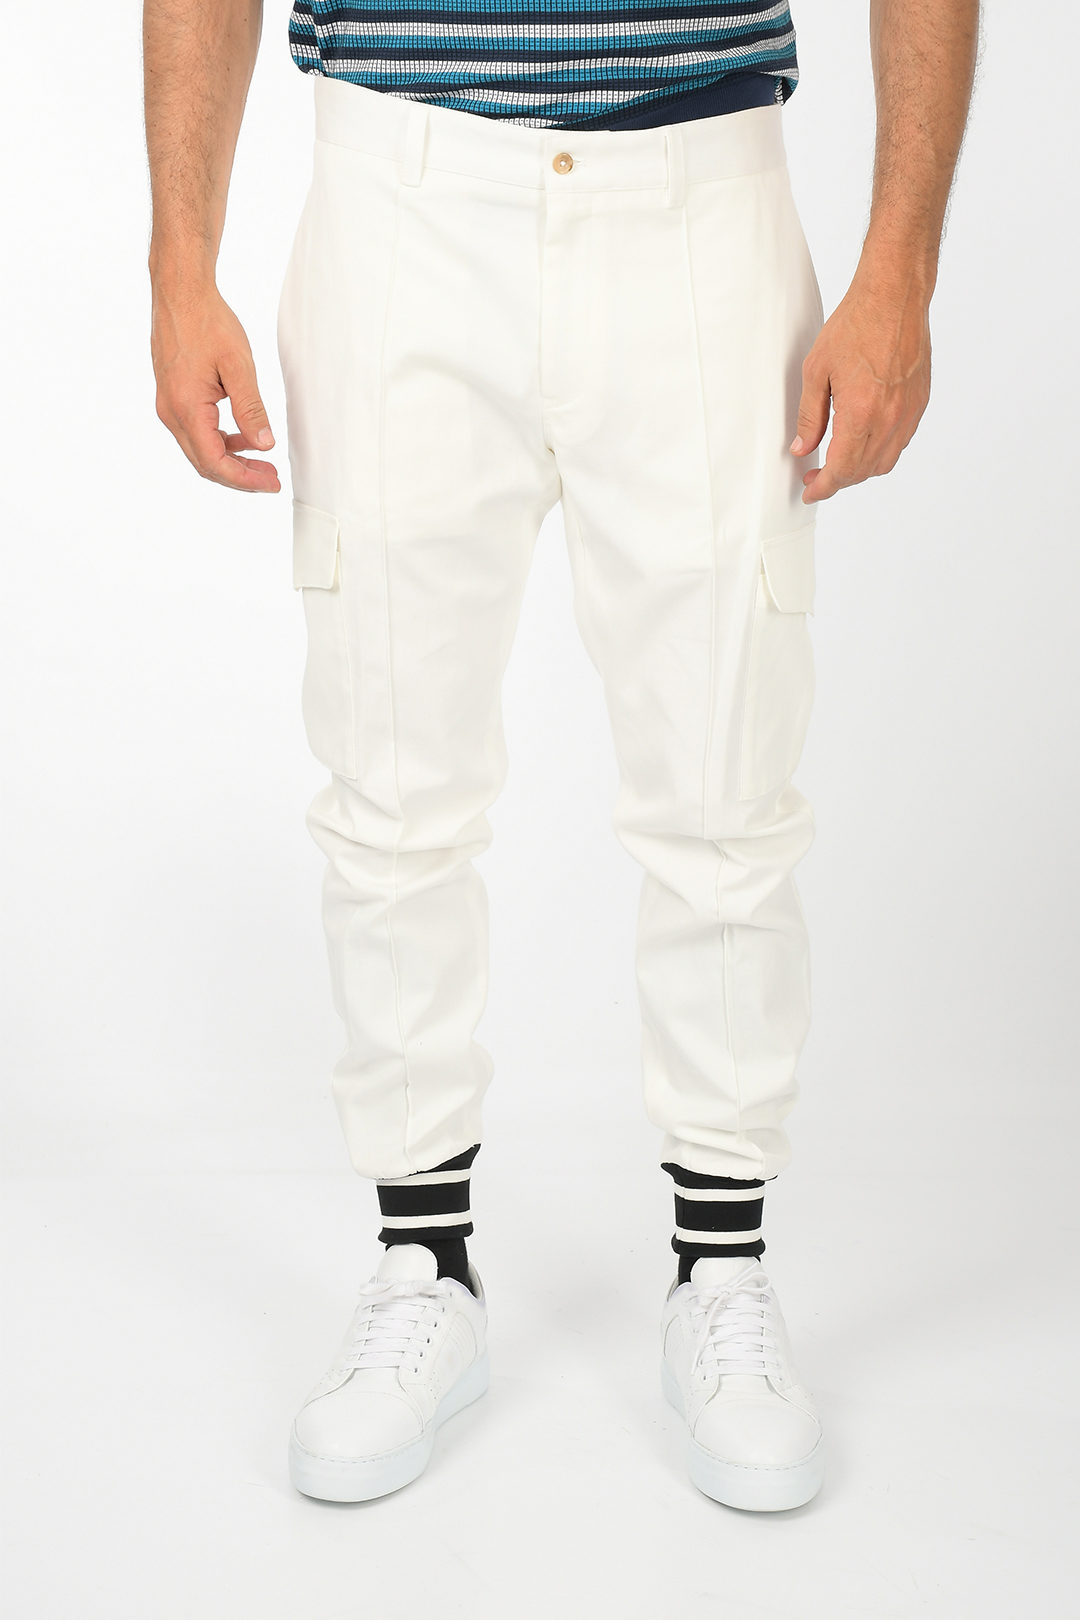 Dolce & Gabbana Cargo Pants with Elastic Ankle Band men - Glamood Outlet